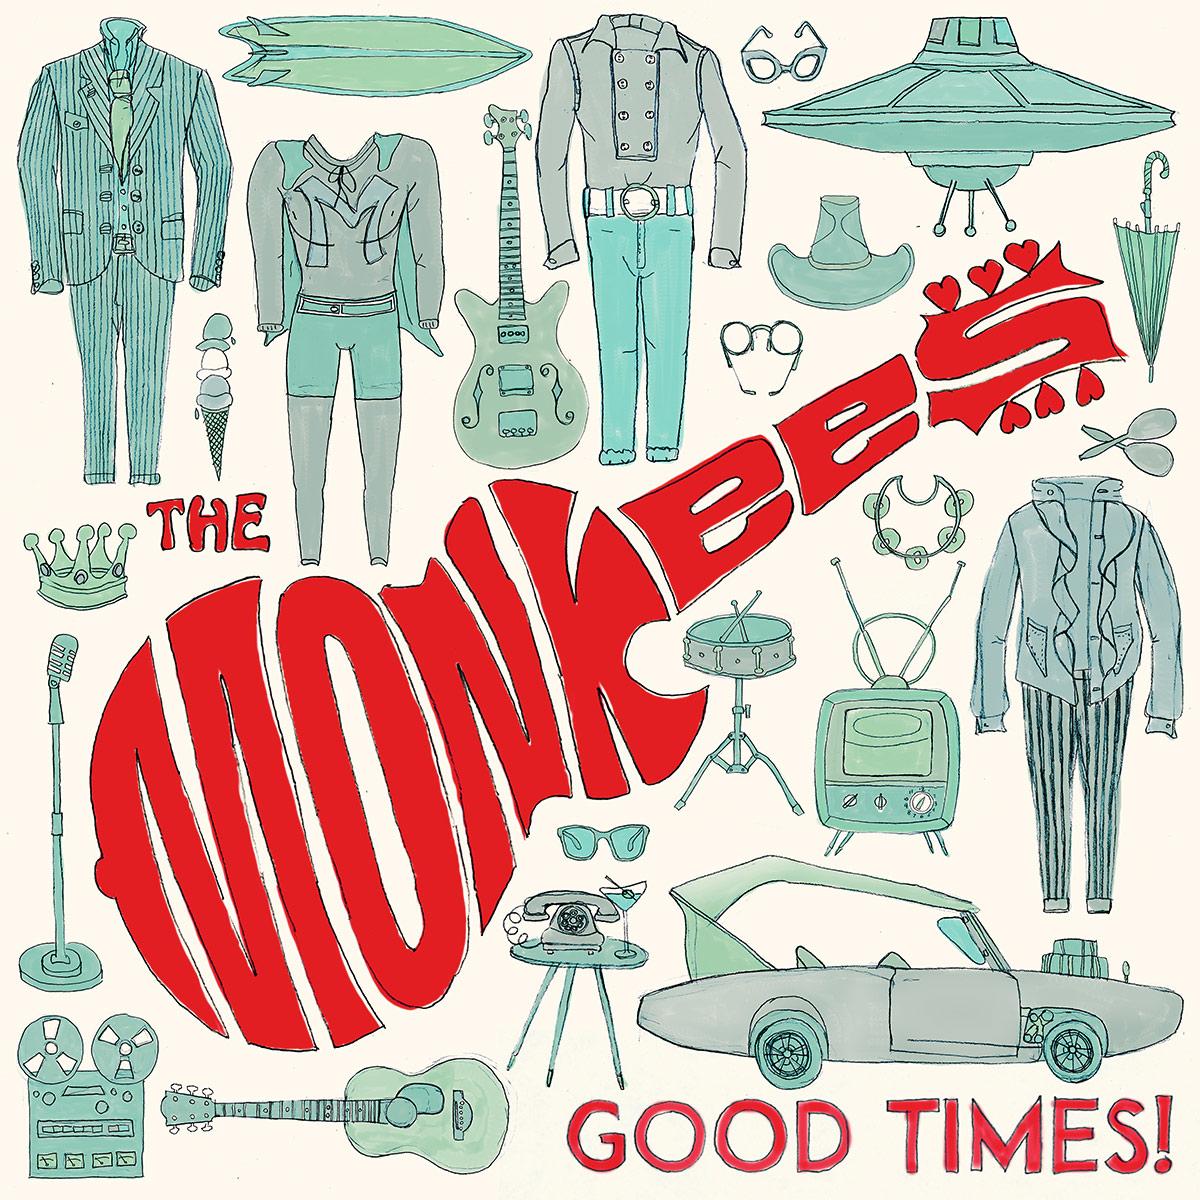 THE MONKEES LET THE GOOD TIMES! ROLL WITH NEW ALBUM